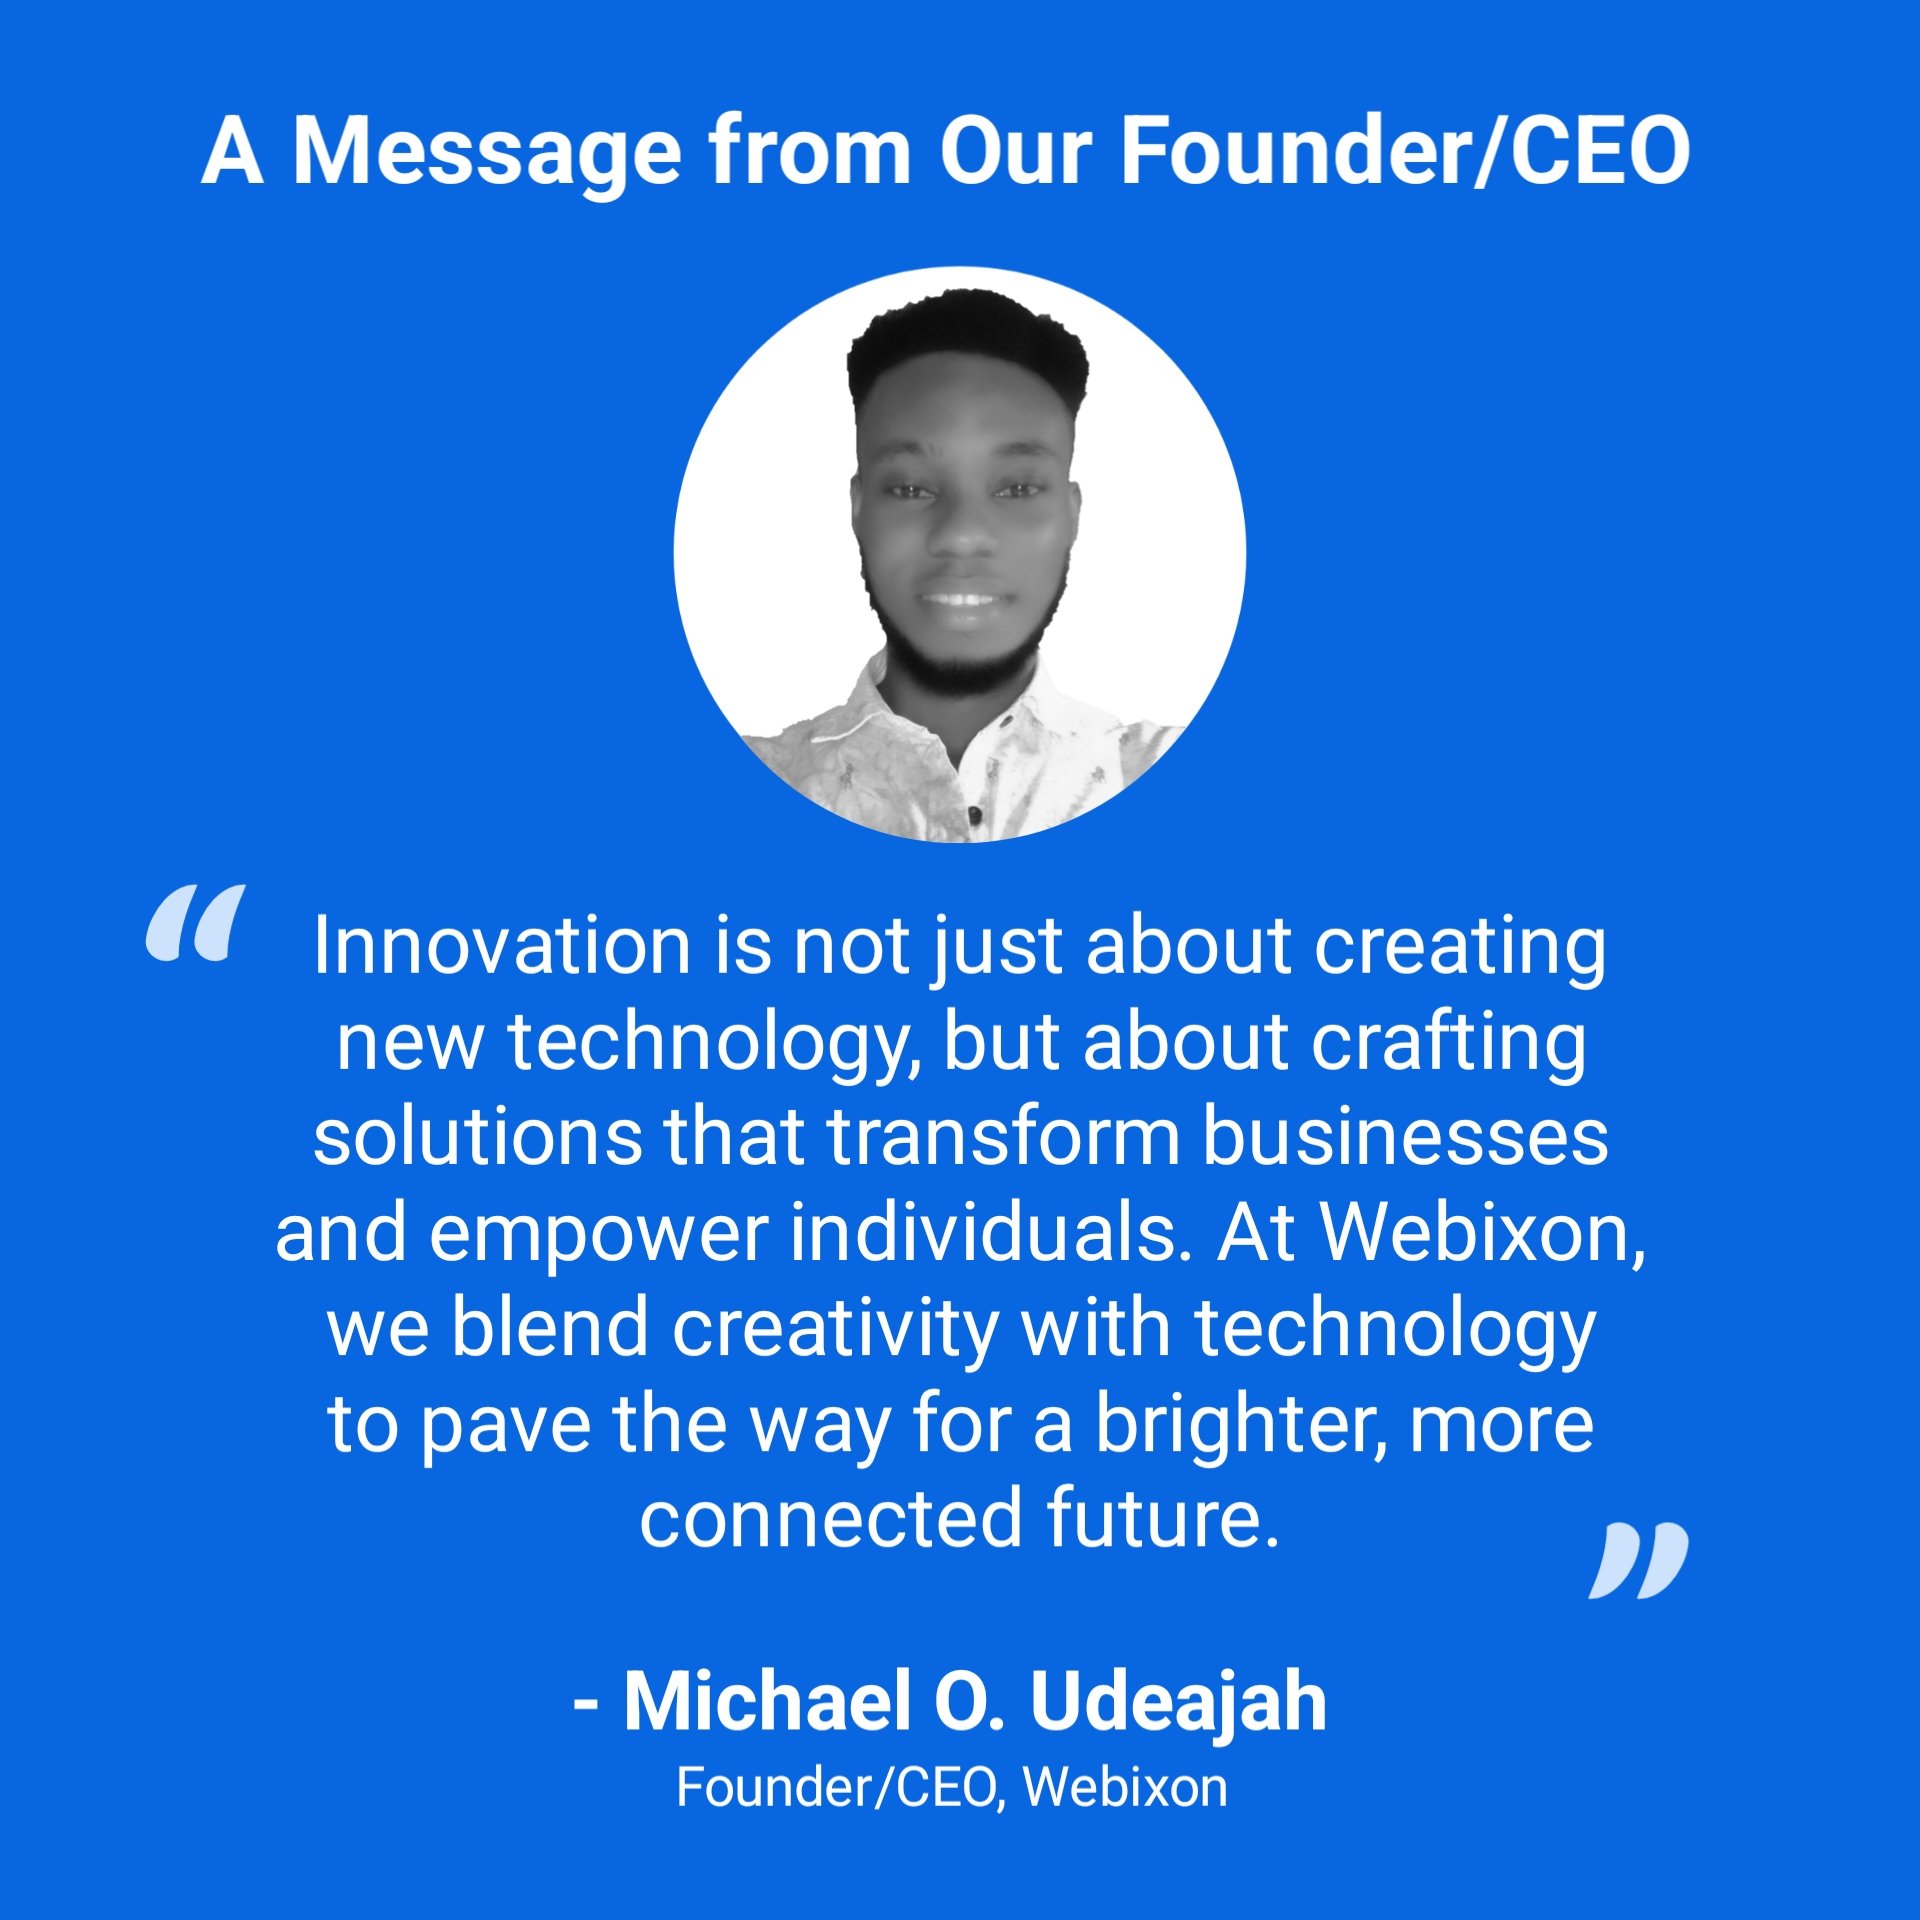 Message from Webixon's Founder and CEO 